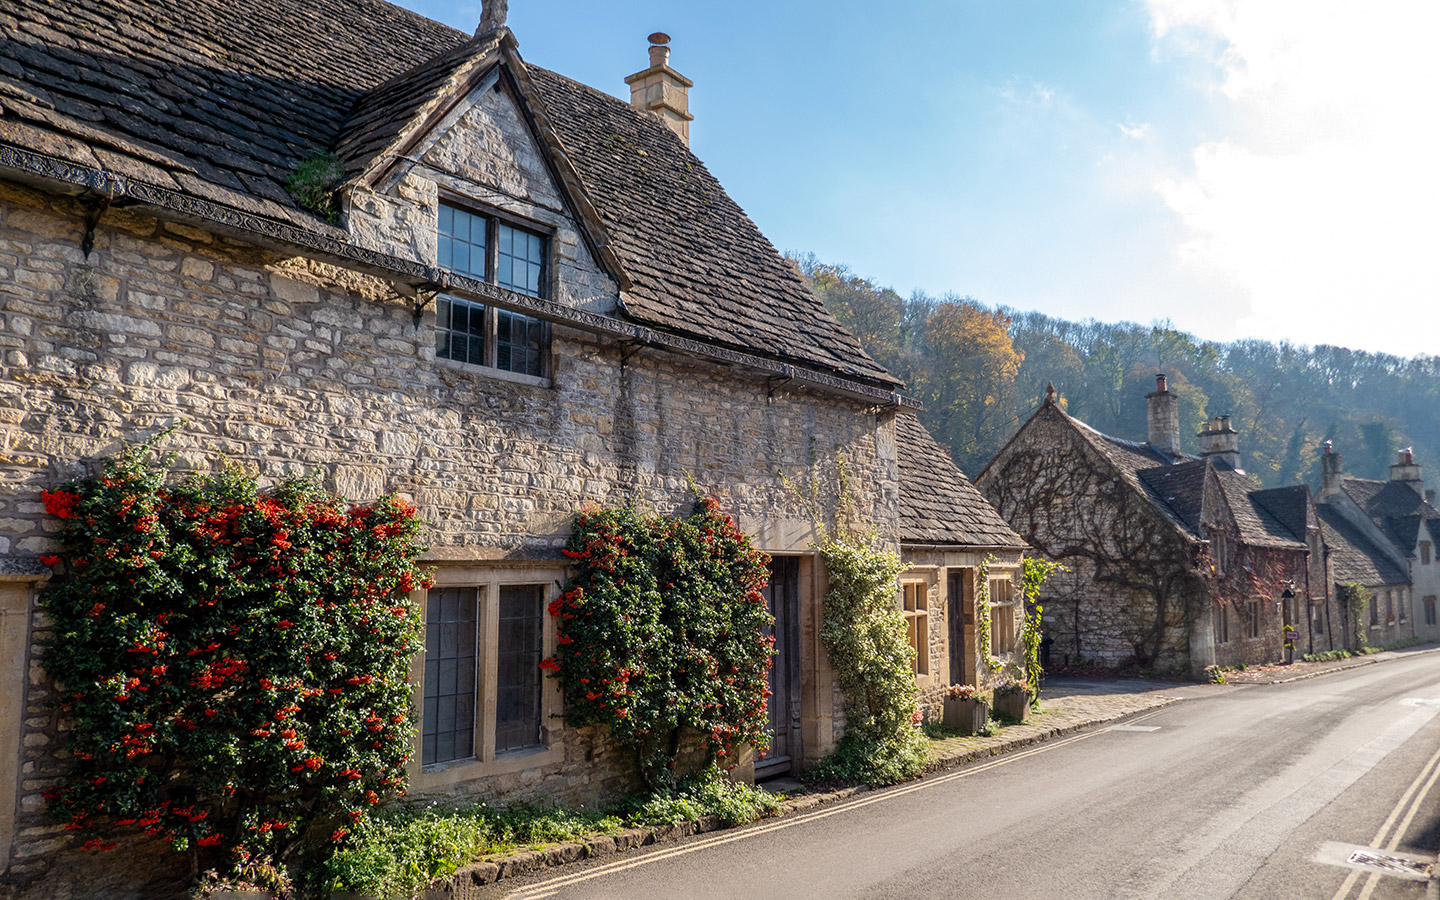 Houses in Castle Combe in autumn